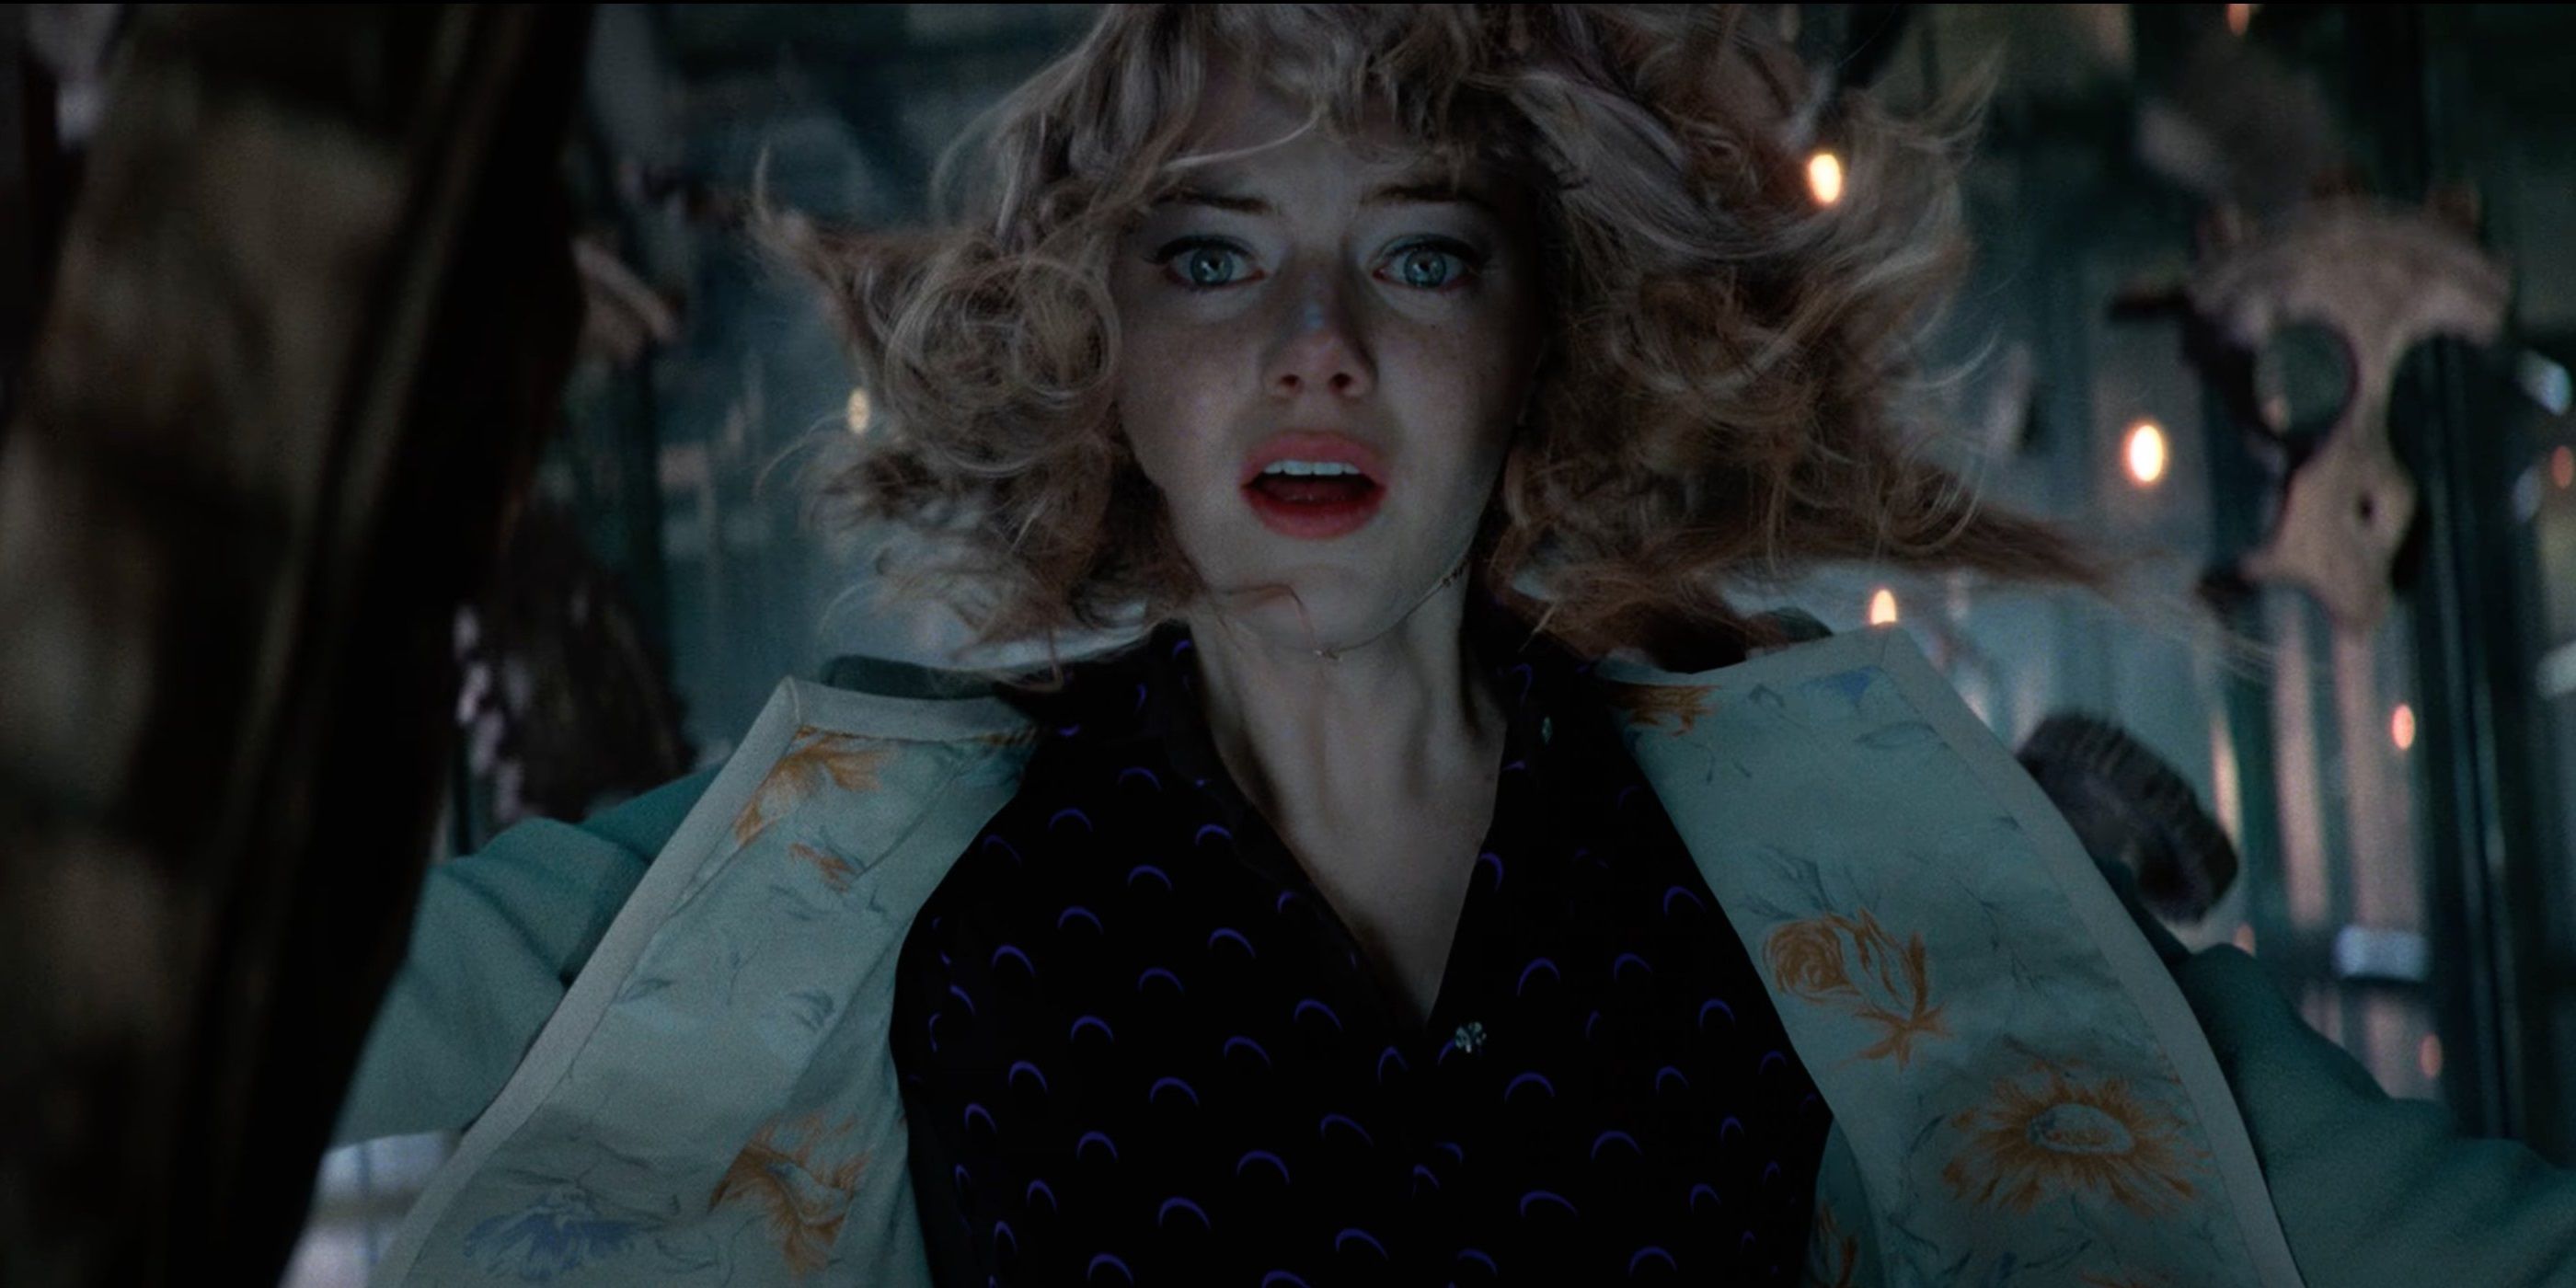 Gwen Stacy falls to her death in The Amazing Spider-Man 2